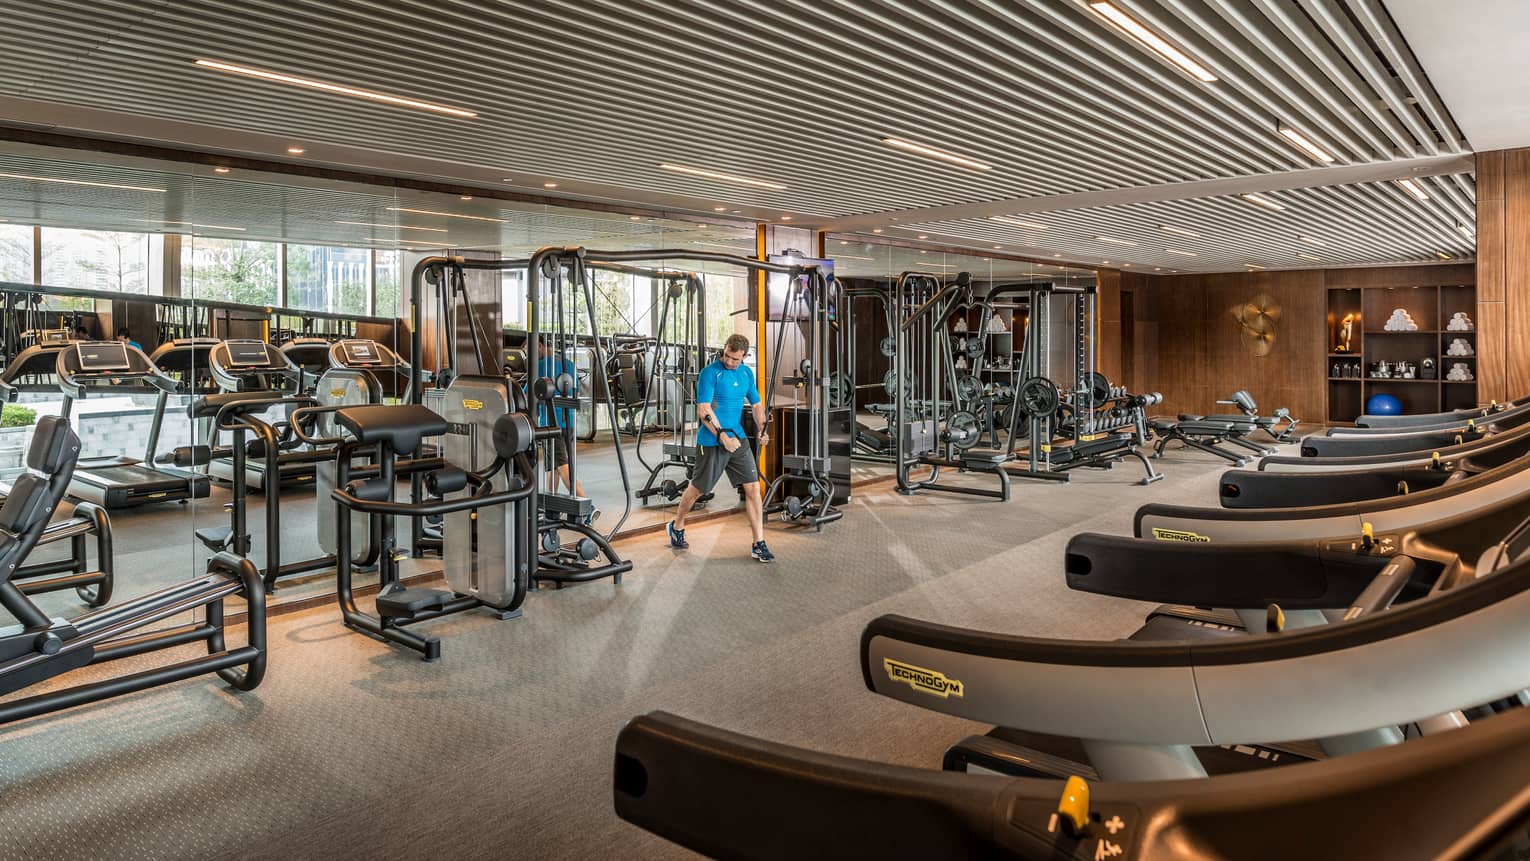 Man pulls weights machine in large Fitness Centre by mirror reflecting treadmills